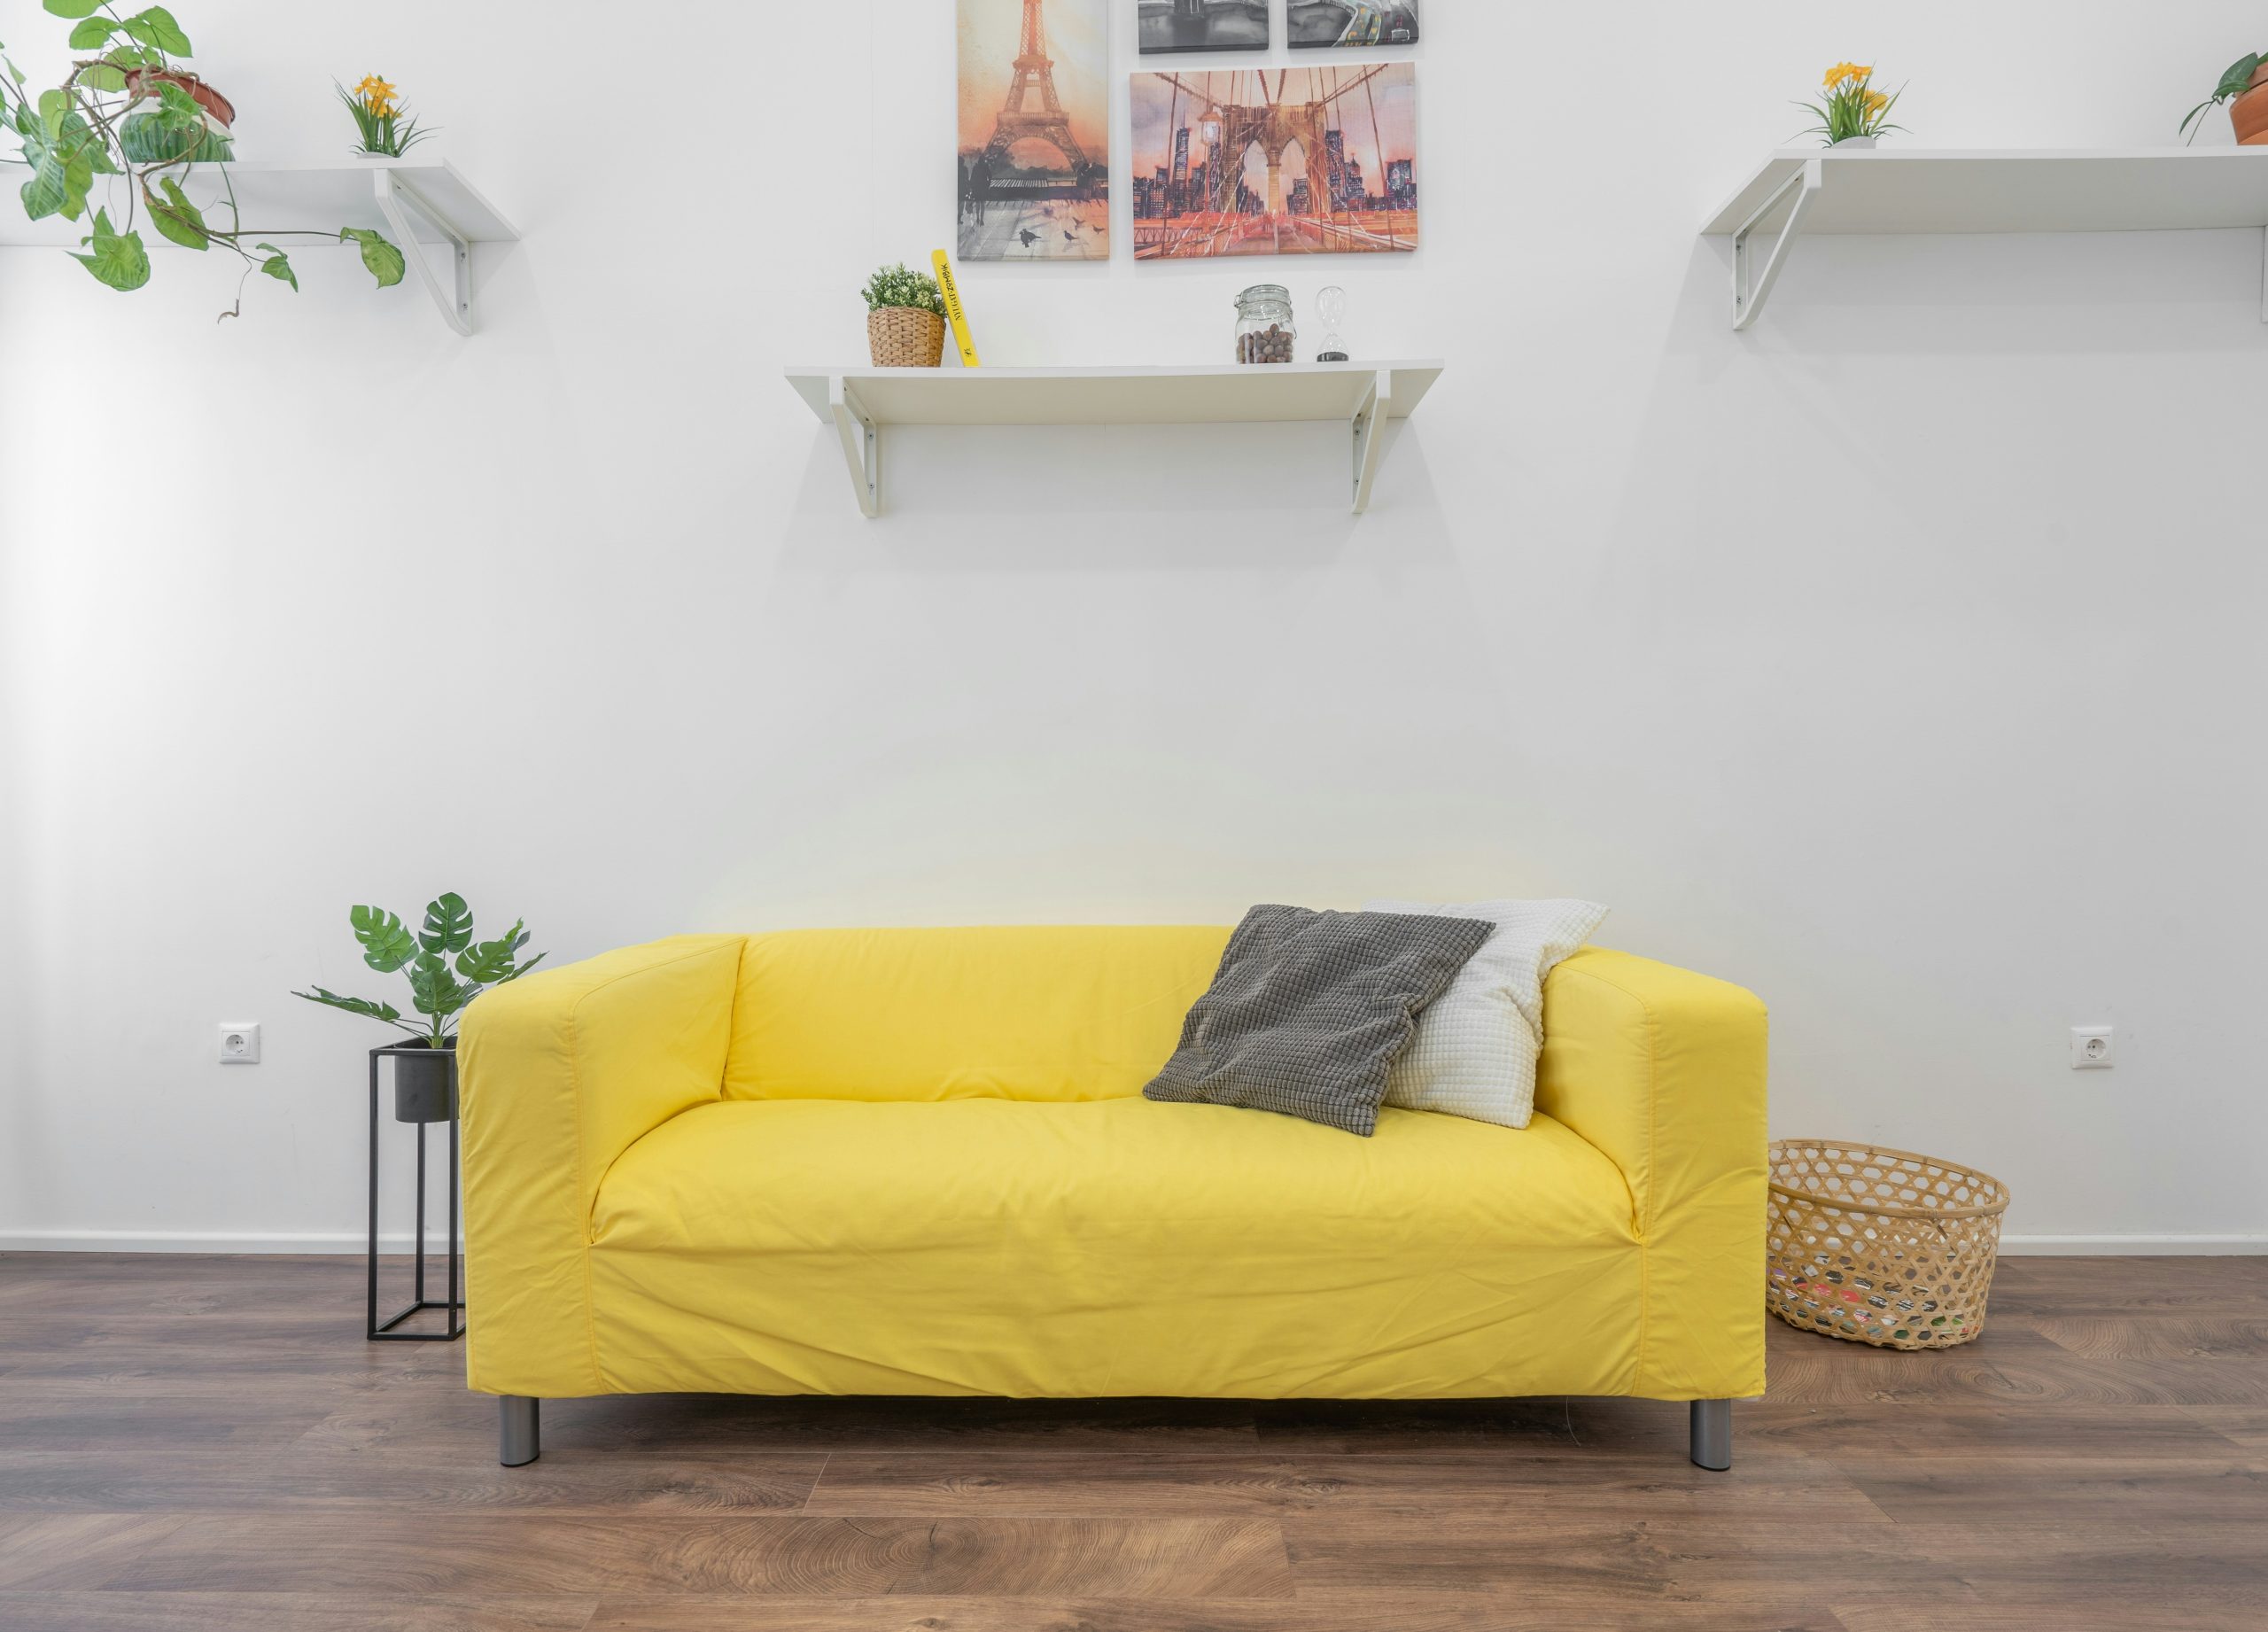 explore a wide selection of stylish and comfortable sofas at great prices. find the perfect sofa for your living room, available in various styles and colors.